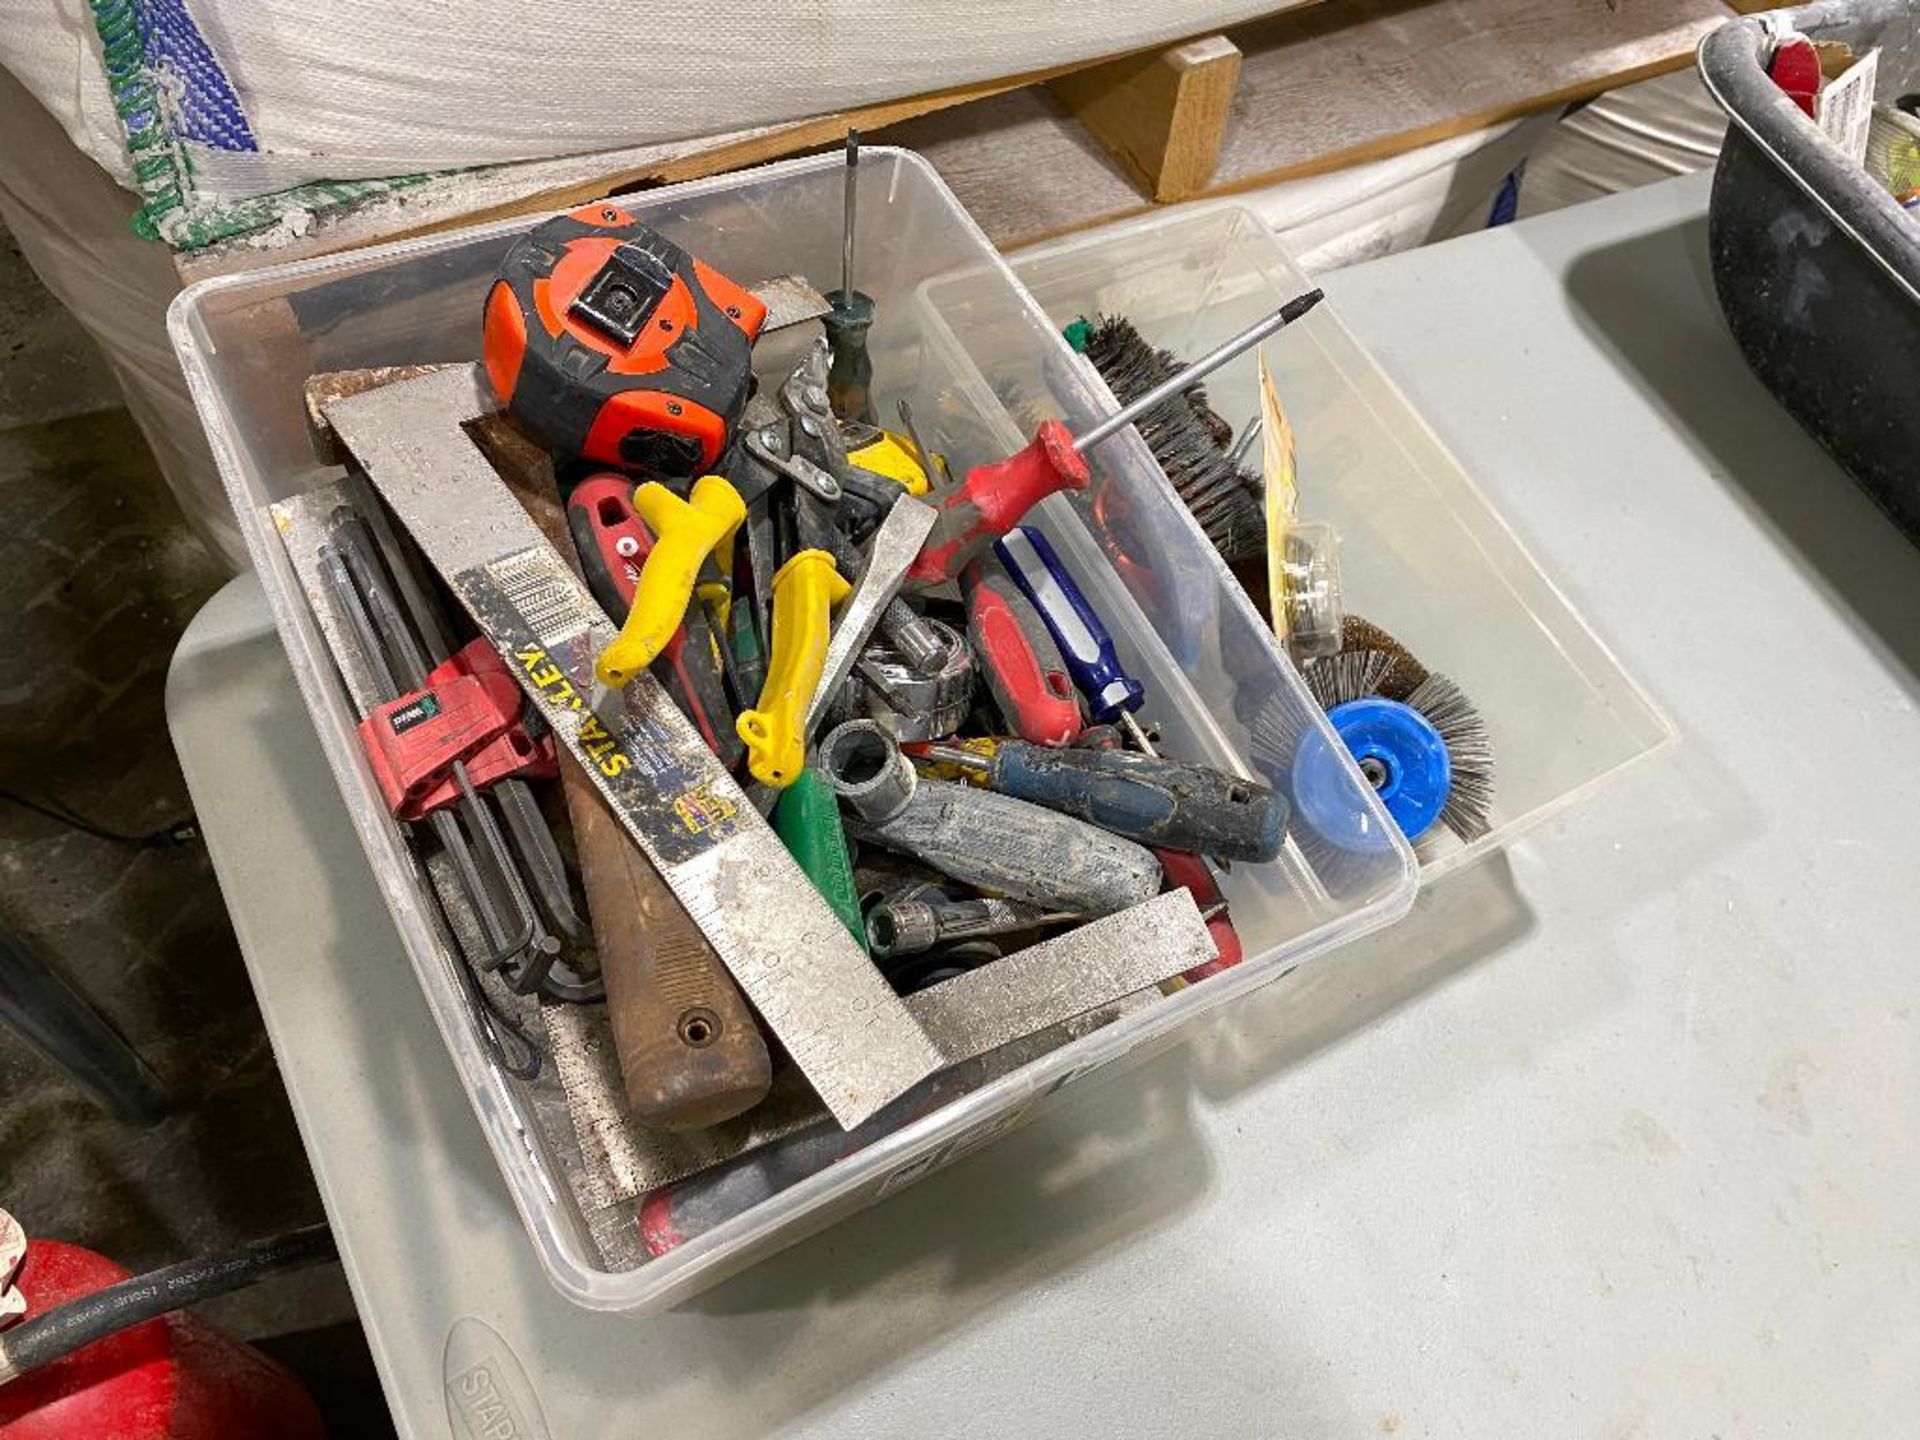 Lot of Asst. Tools including Snips, Squares, Screw Drivers, Tape Measure, etc. - Image 3 of 3